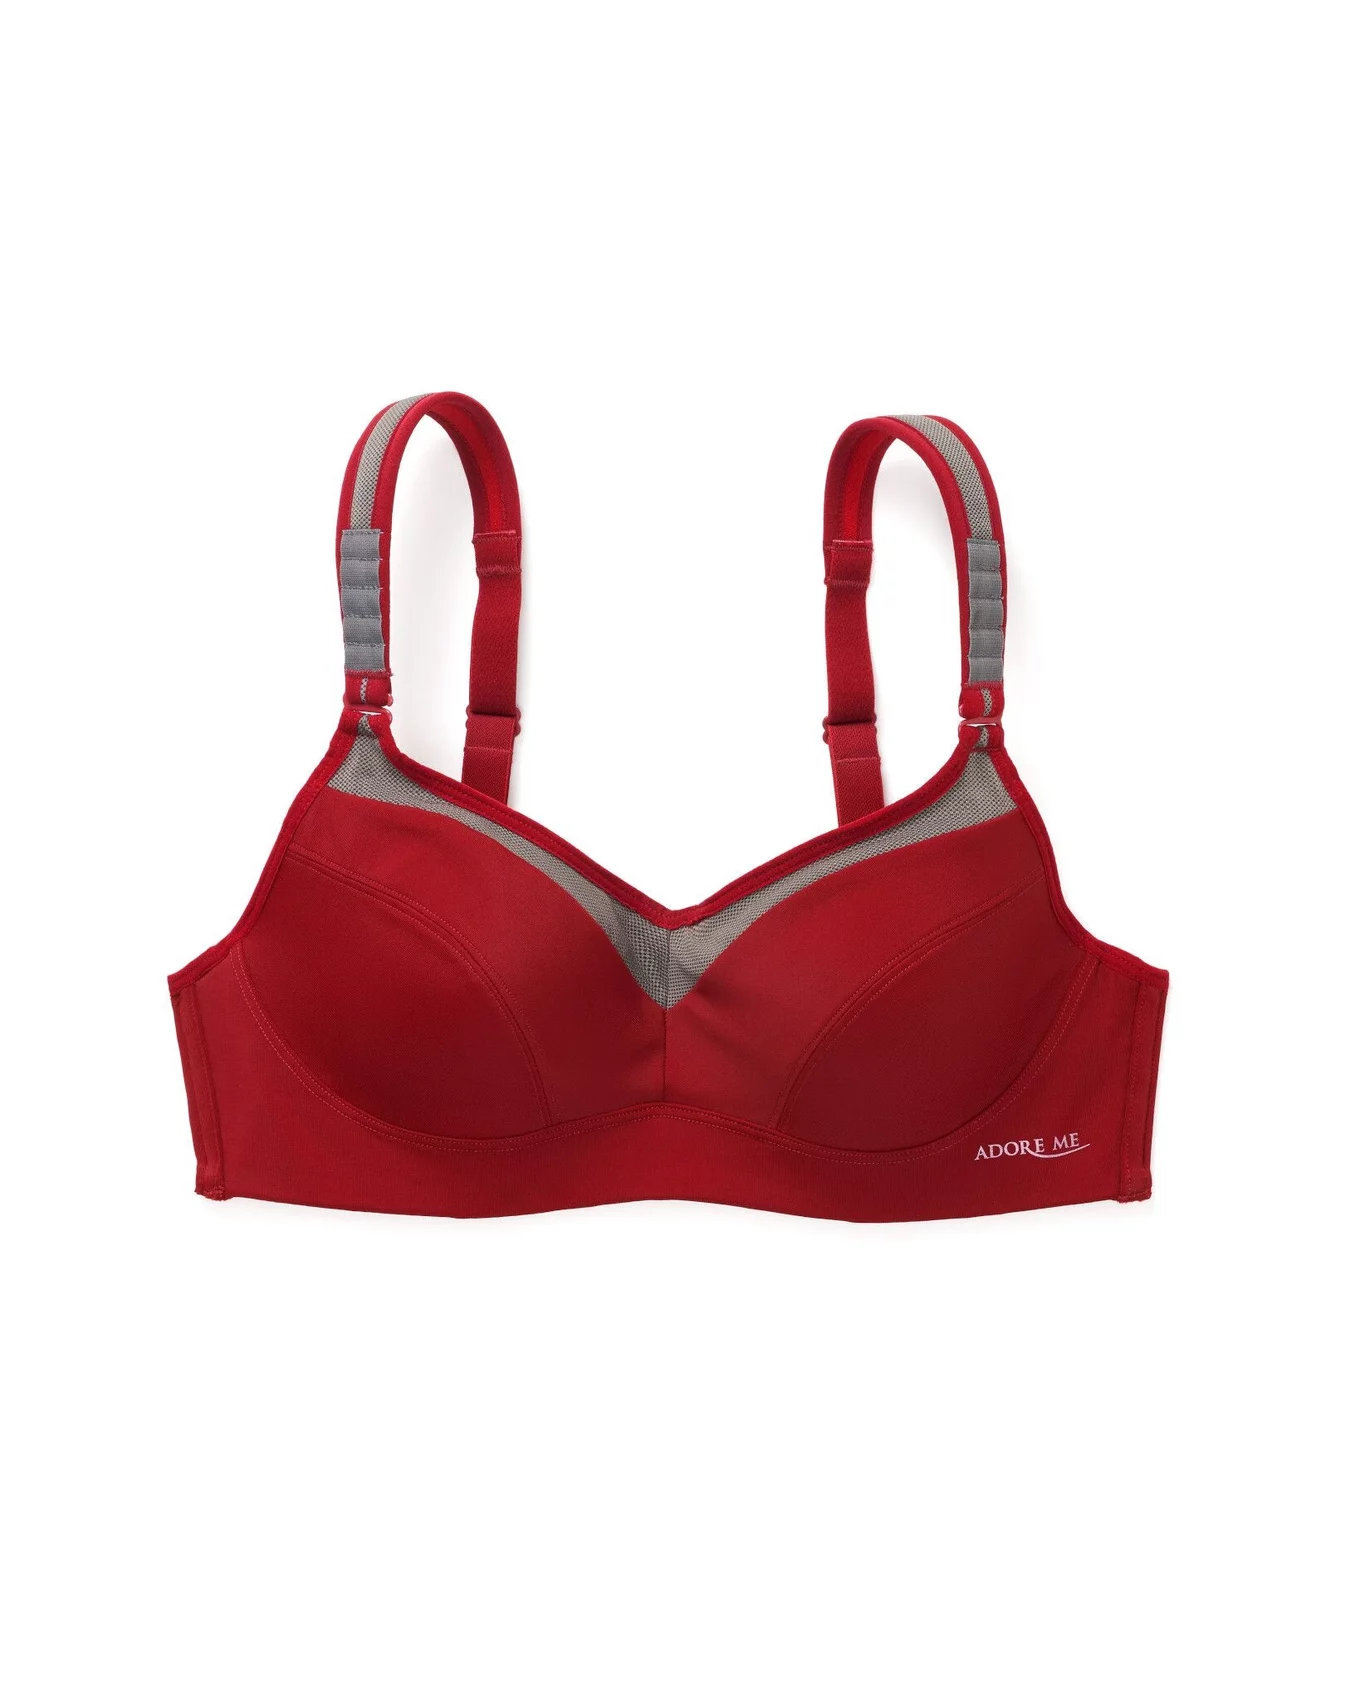  Mycare Jim Sporty Marooncolor Bra For Women And Full